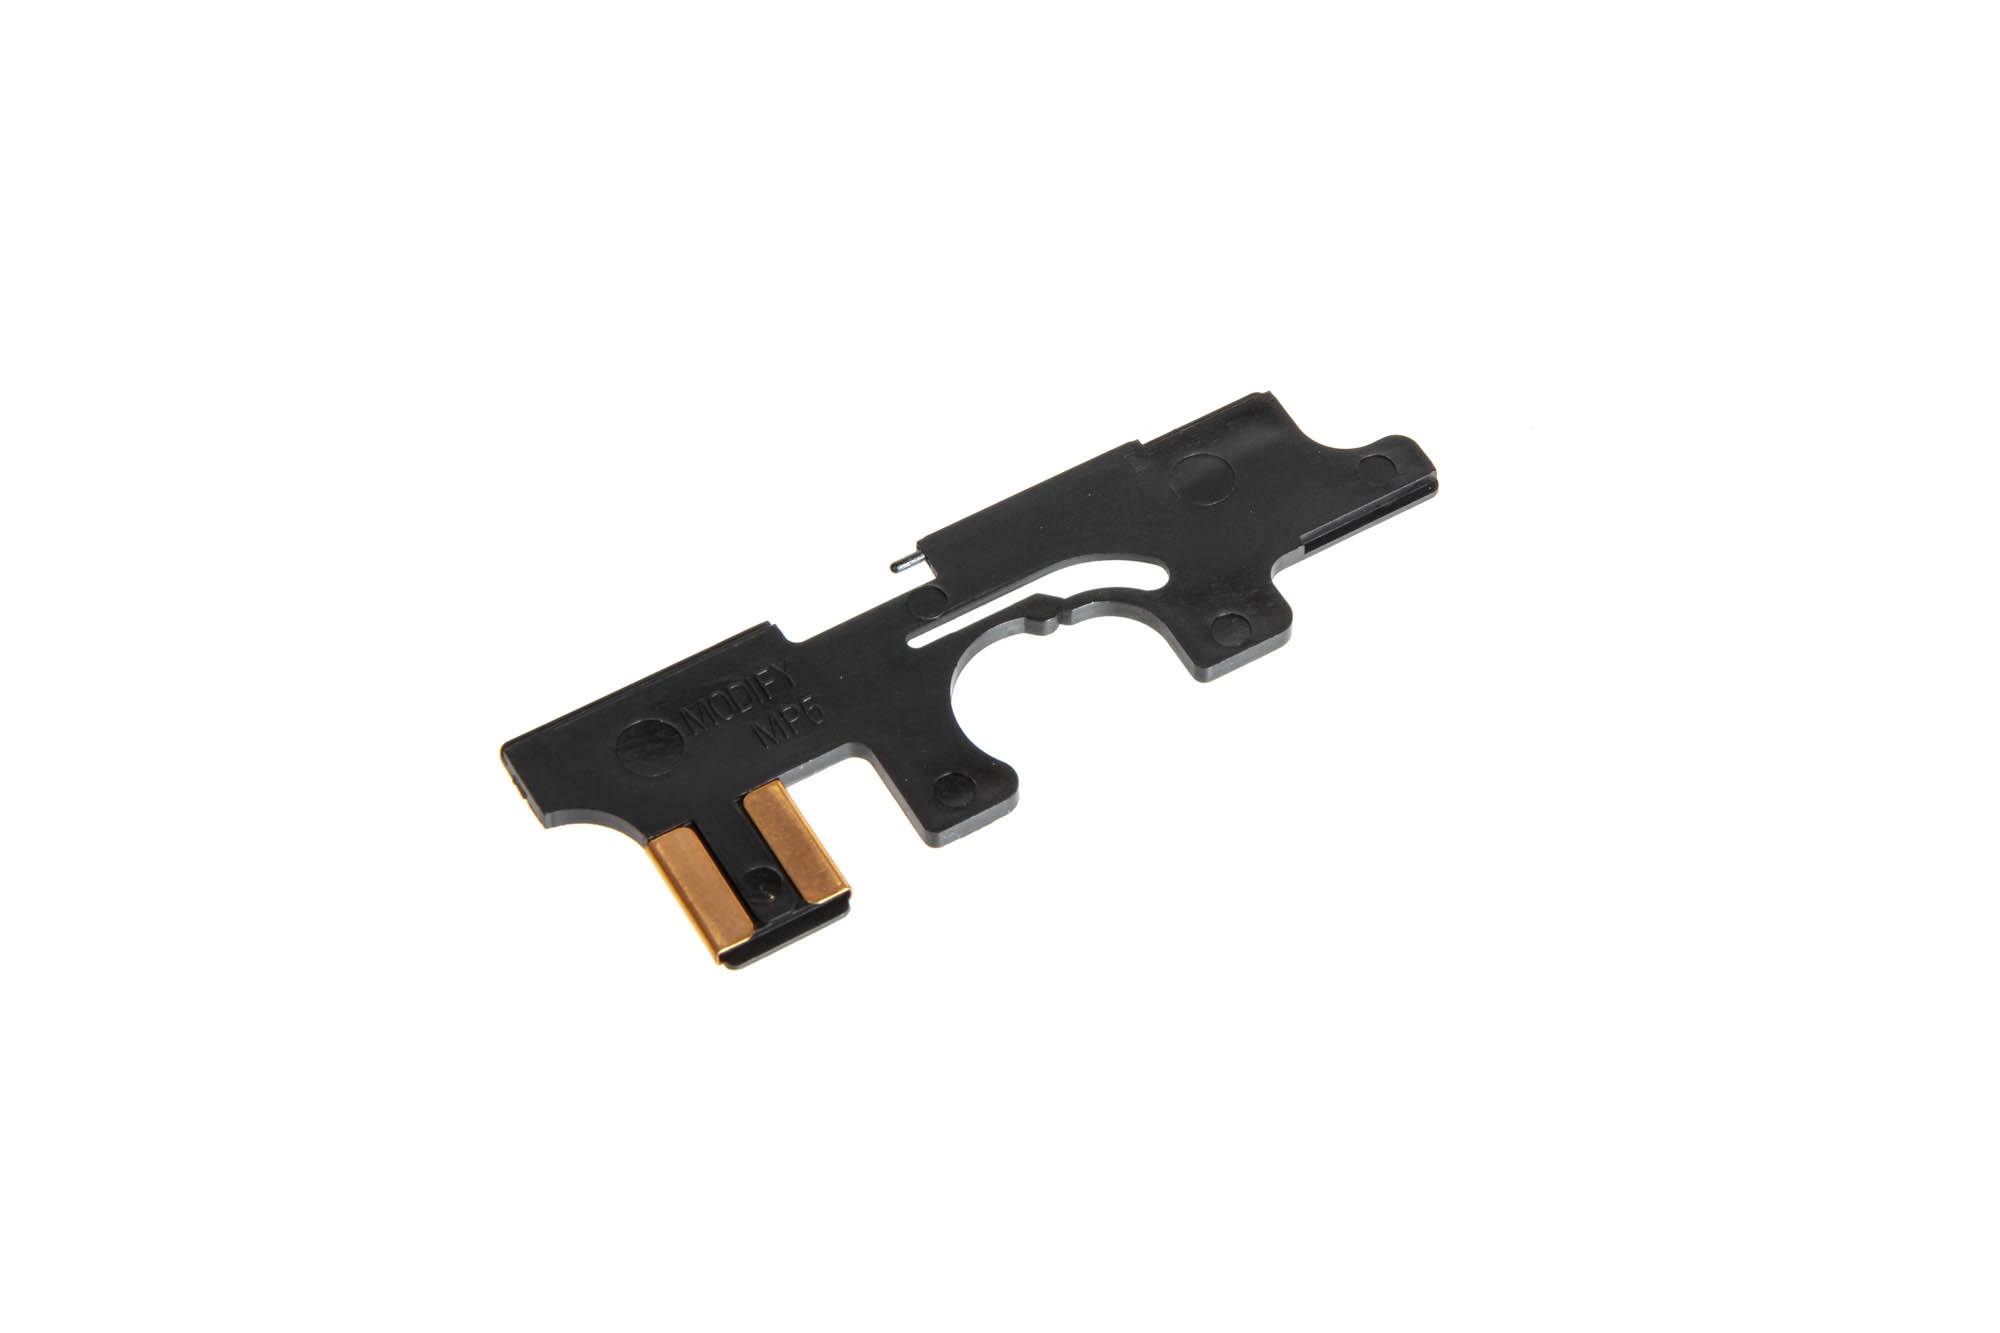 Selector plate for MP5 airsoft rifles